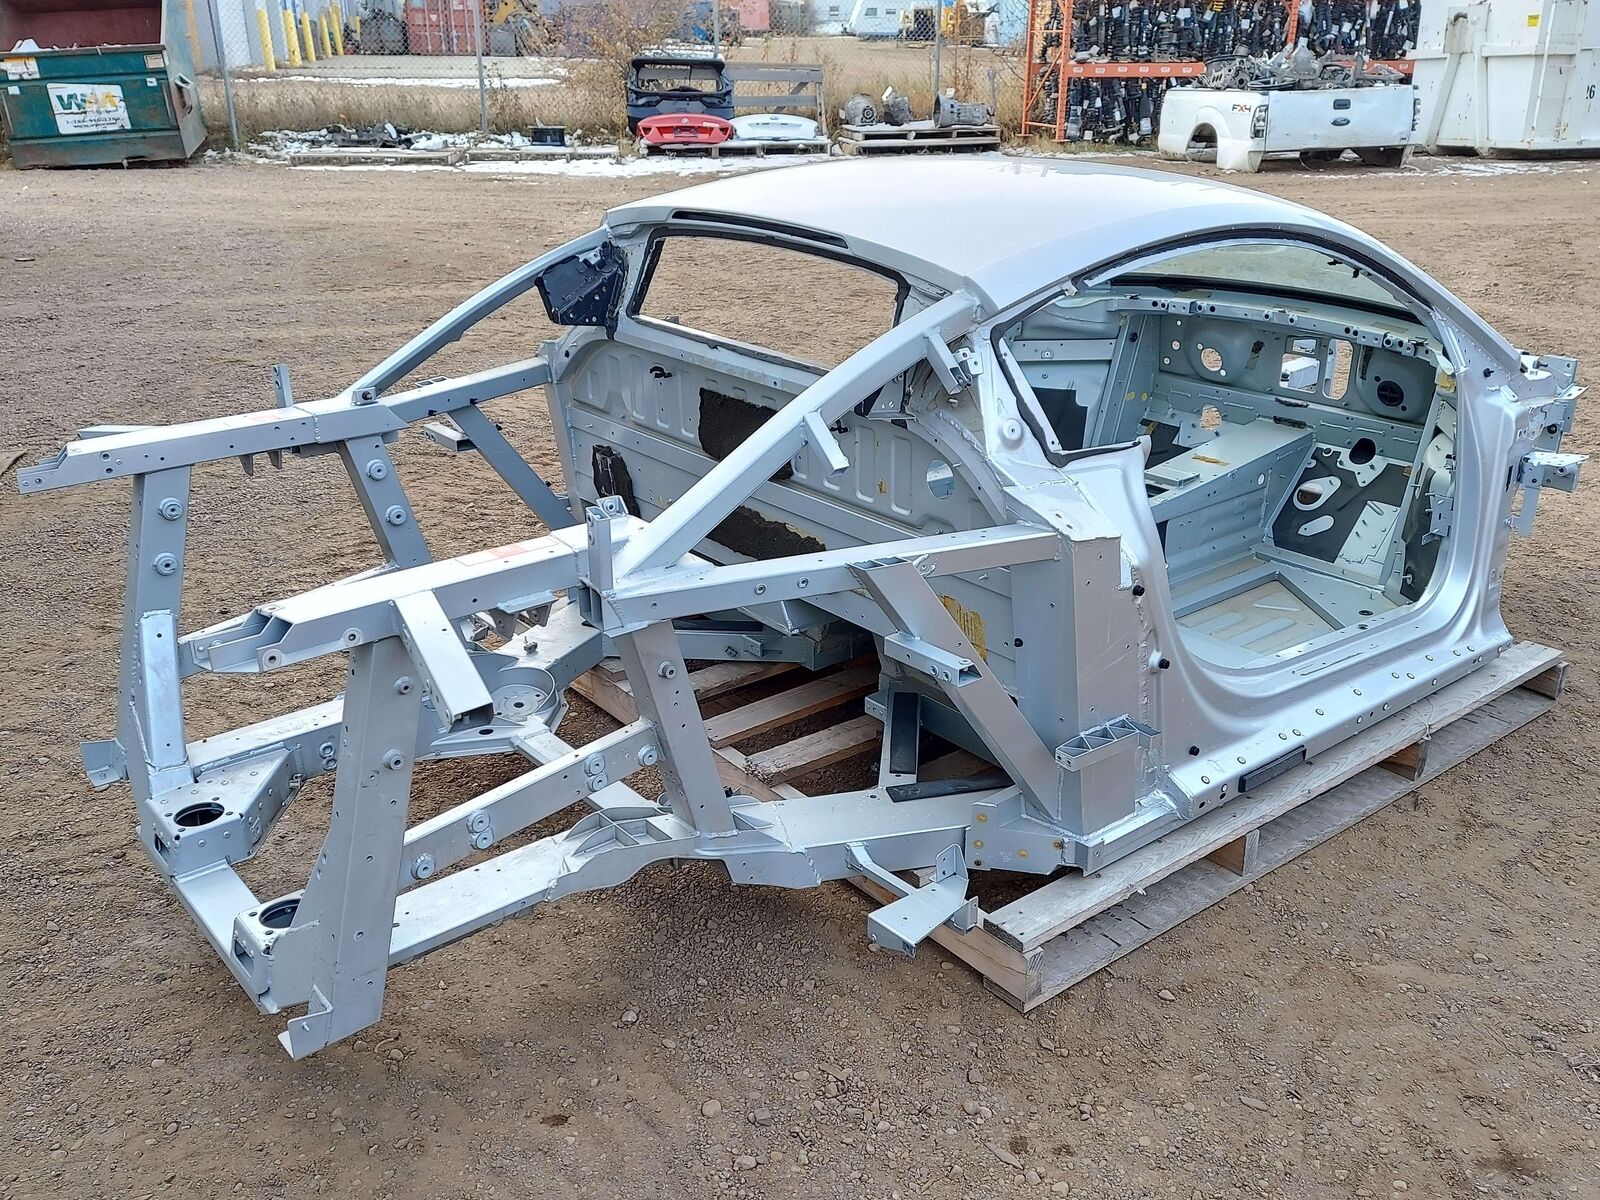 2009 AUDI R8 FRAME BODY SHELL SILVER *FRONT END BENT WINDHIELD CRACKED NOTES*